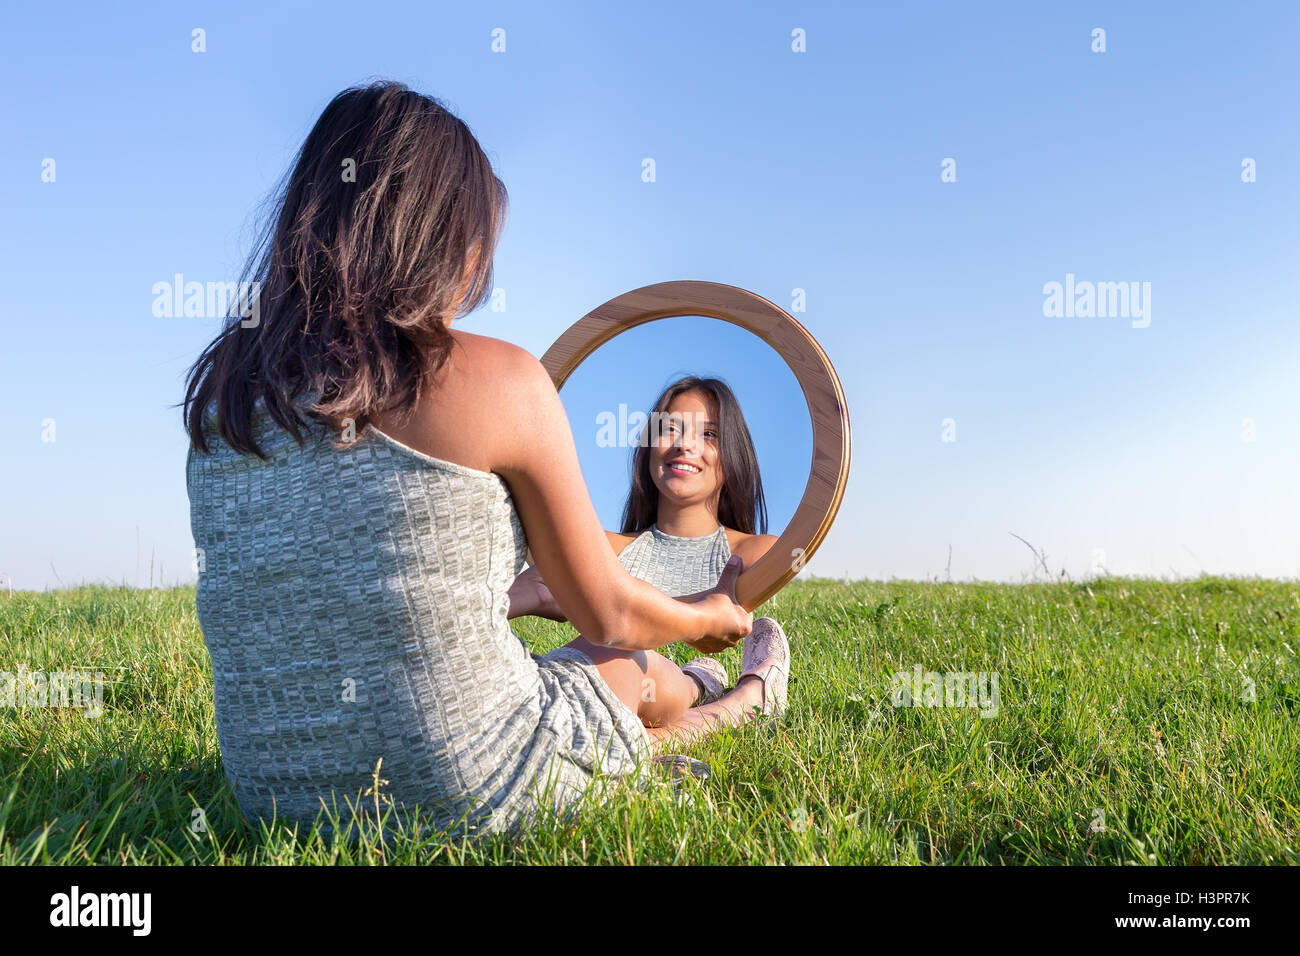 Woman sitting on grass looking at  her mirror image Stock Photo